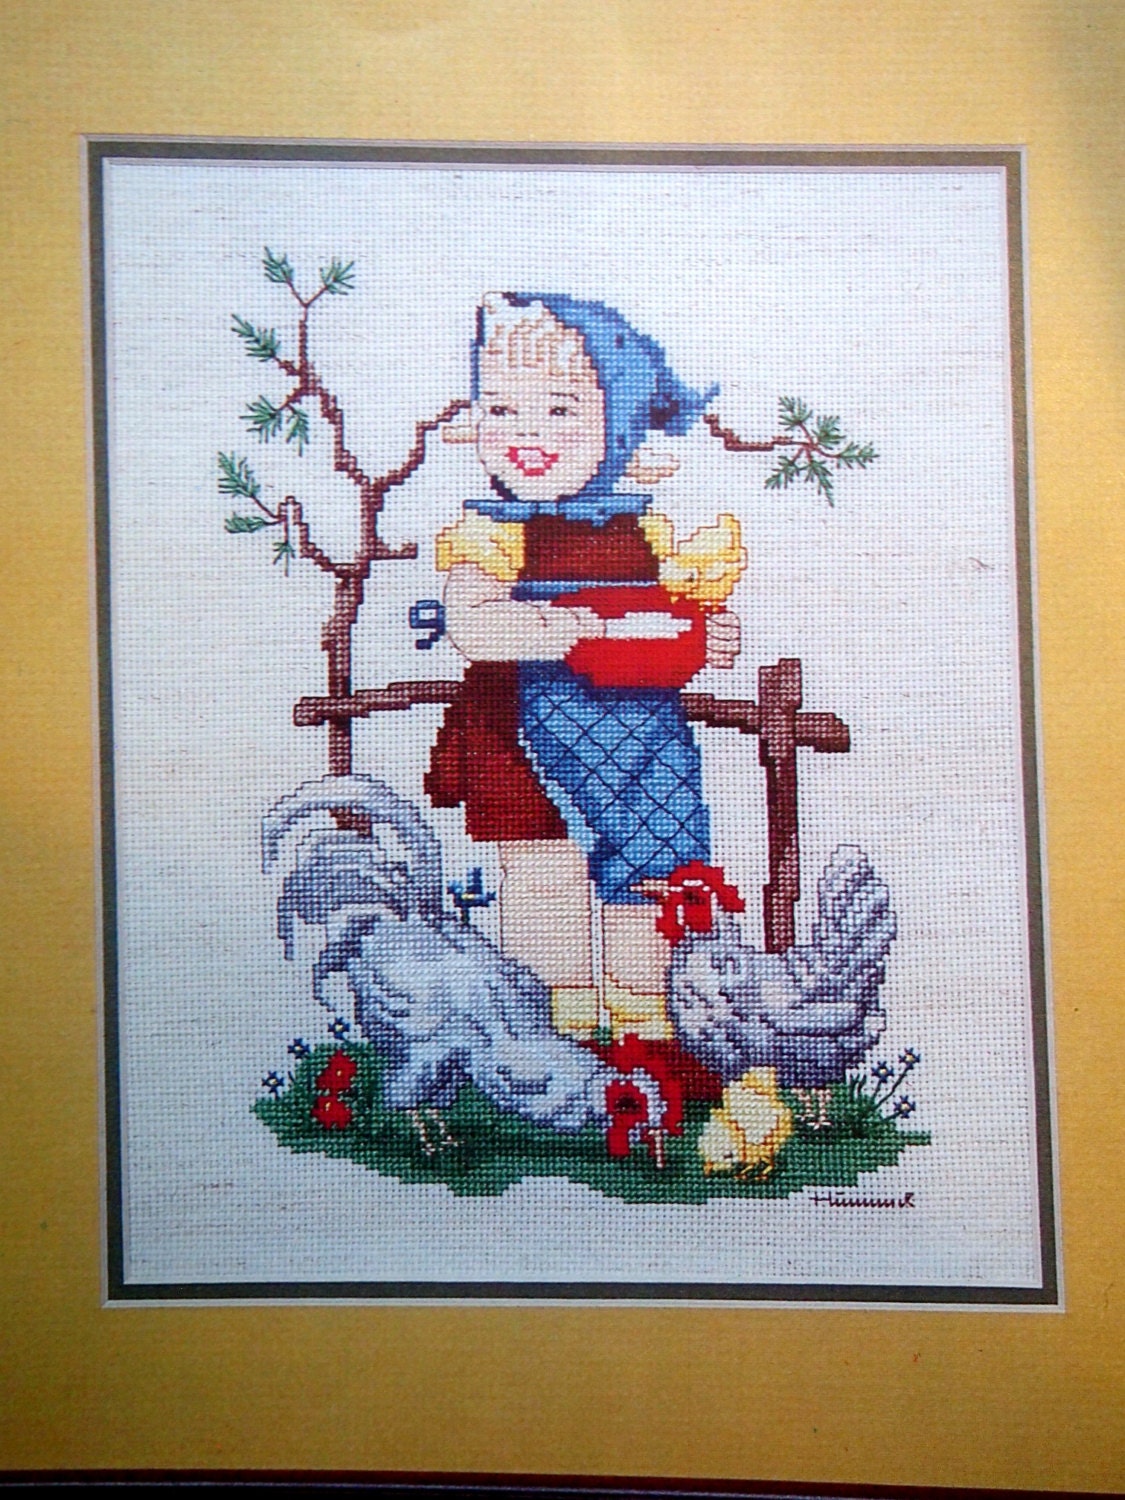 Hummel Designs In Counted Cross Stitch Vintage Cross Stitch